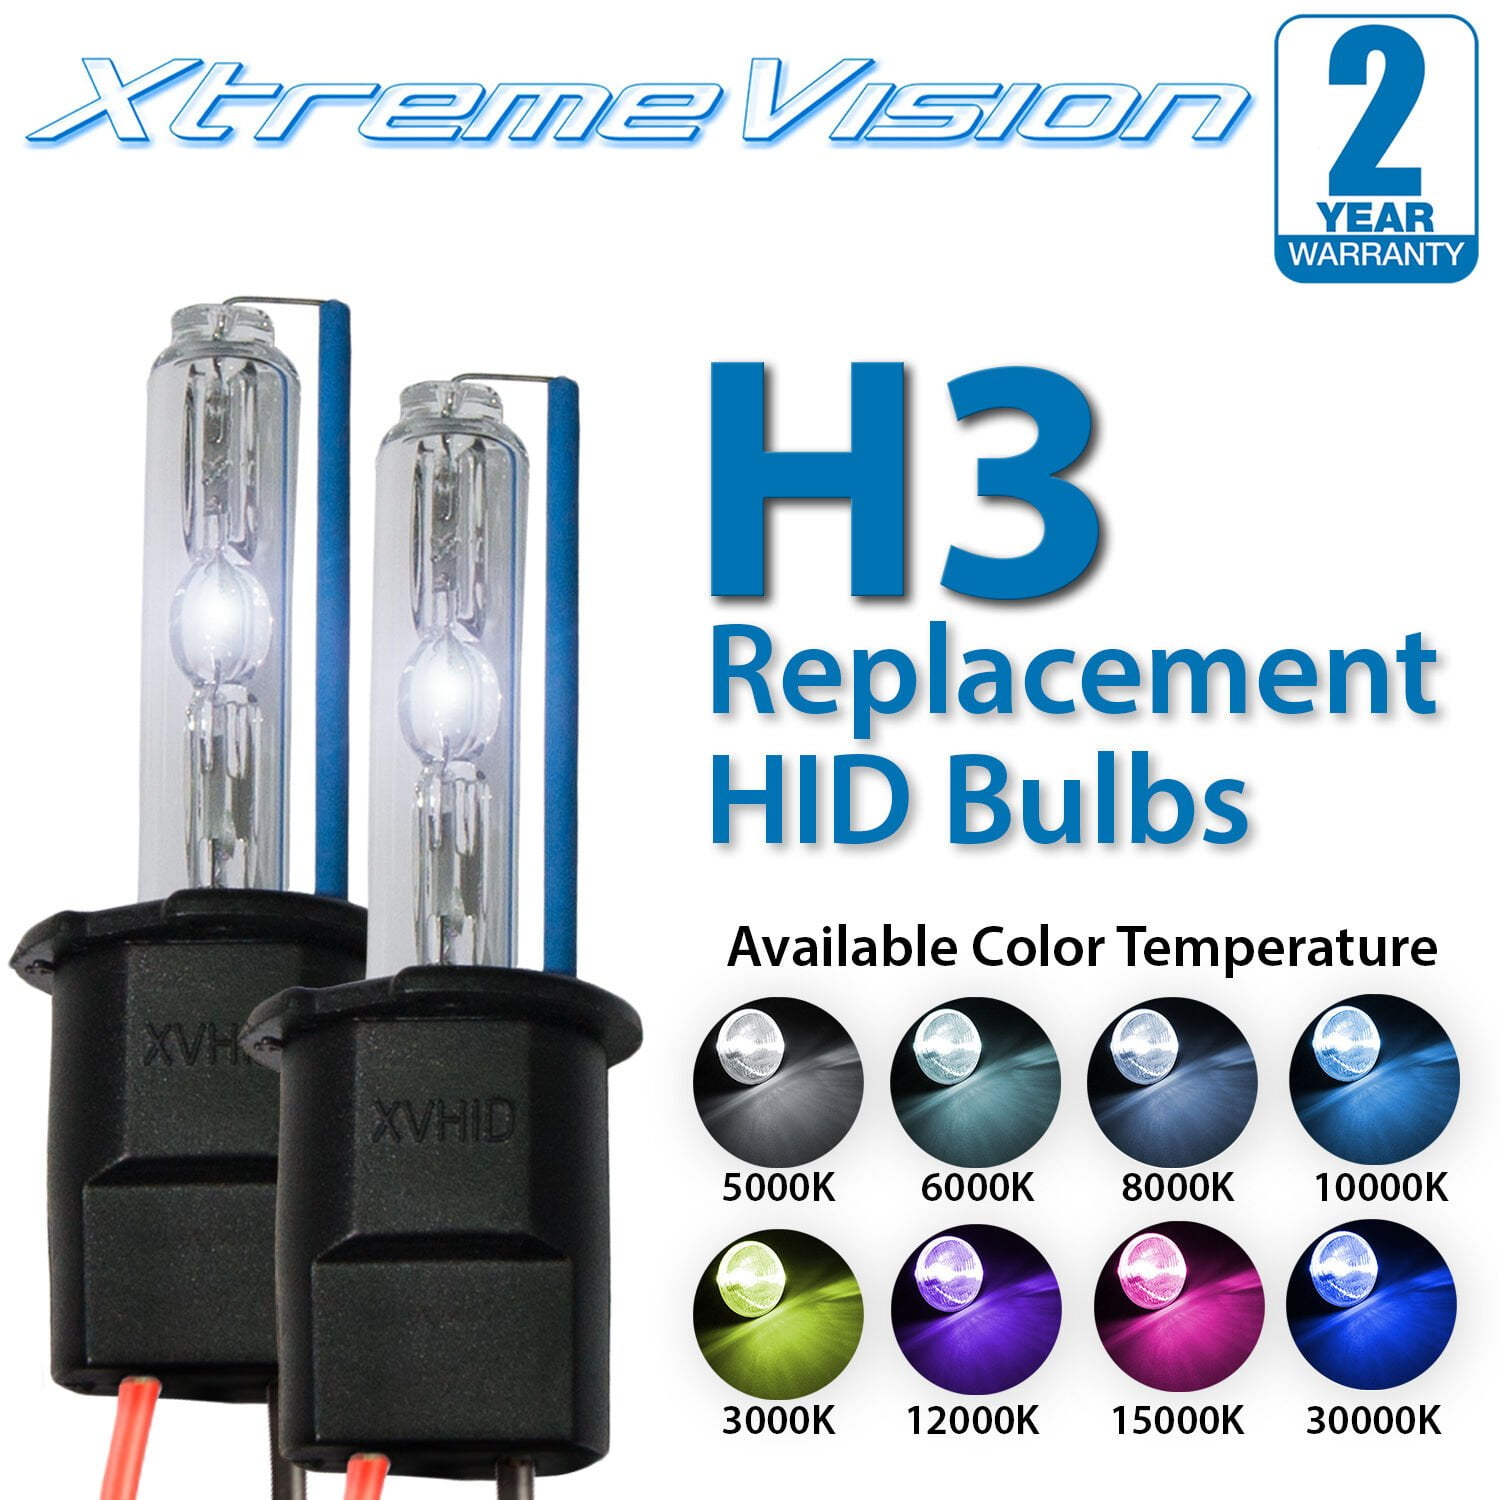 H3 LED High Performance Replacement Bulbs (pair)